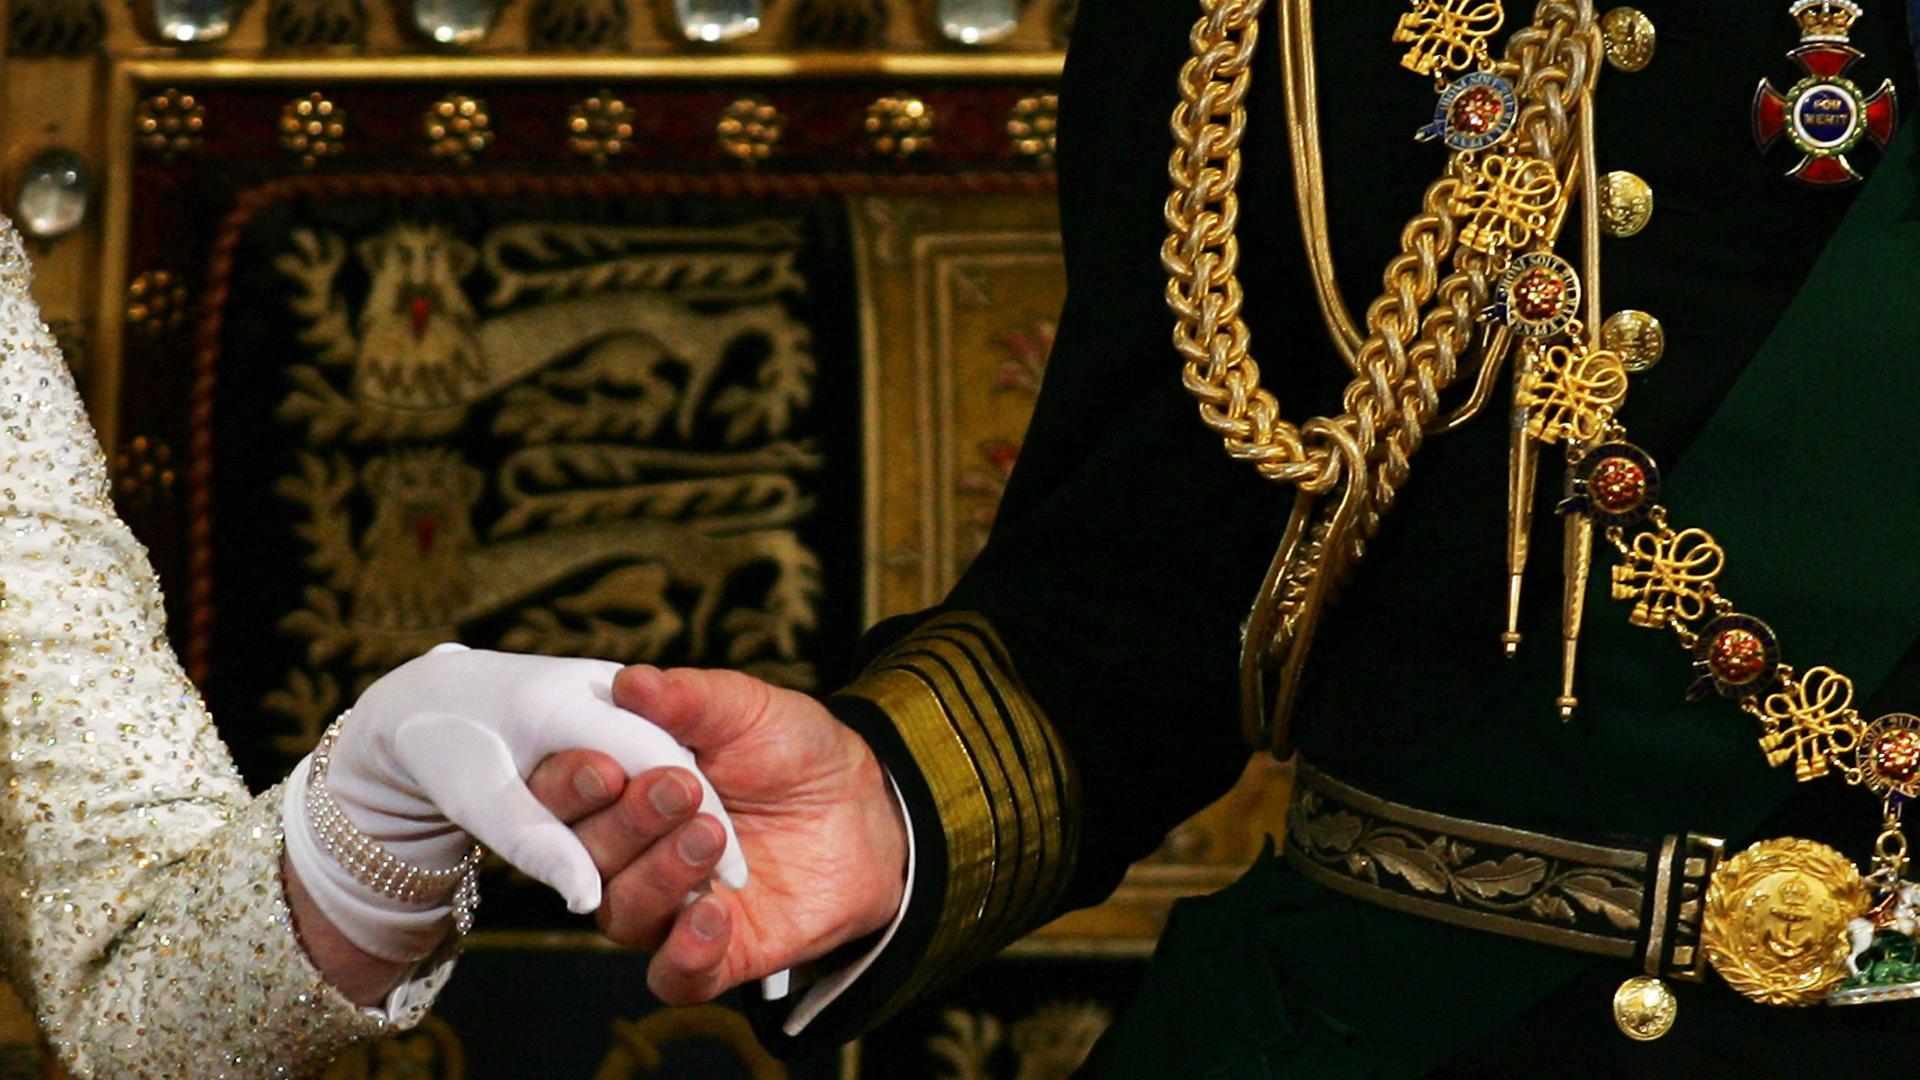 (FILES) In this file photo taken on November 15, 2006 Britain's Prince Philip, Duke of Edinburgh (R) holds the Britain's Queen Elizabeth II's (L) hand as she steps down after reading her speech during the State Opening of Parliament in London. - Queen Elizabeth II's 99-year-old husband Prince Philip, who was recently hospitalised and underwent a successful heart procedure, died on April 9, 2021, Buckingham Palace announced. (Photo by Adrian DENNIS / POOL / AFP)